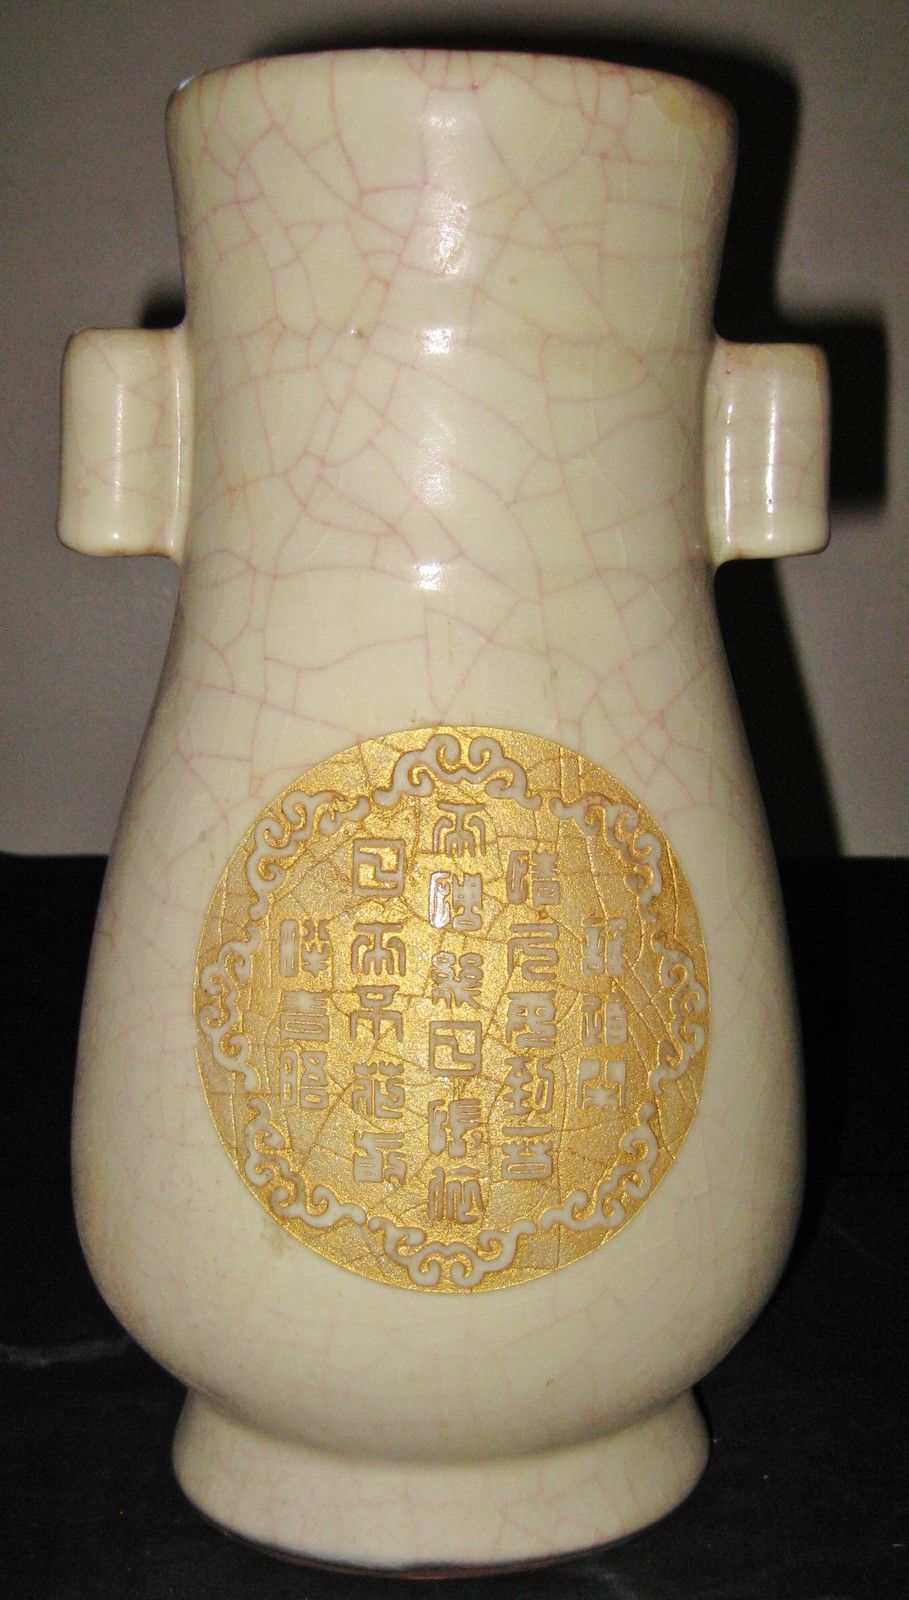 ANTIQUE CHINESE PORCELAIN VASE WITH LETTERS HAND CARVING , RARE, 18TH CENTURY.